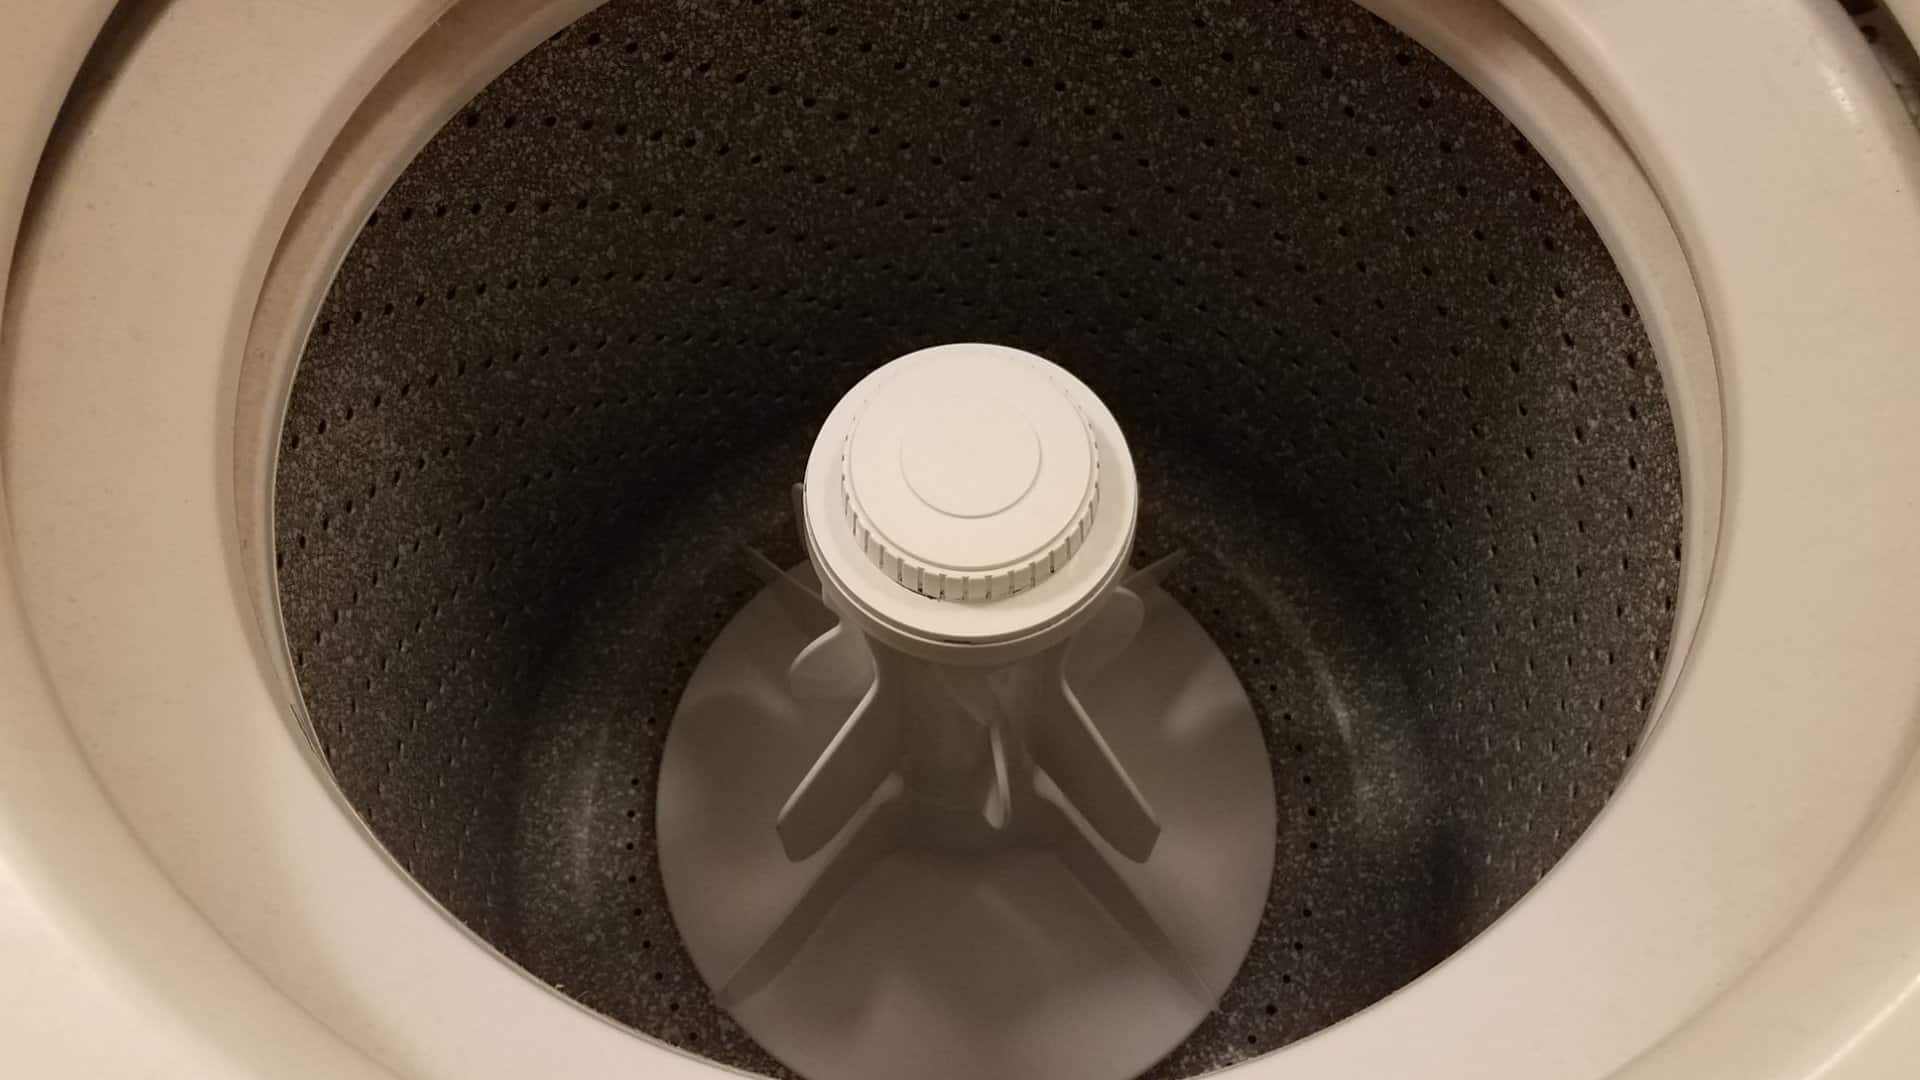 Featured image for “Amana Washer Stuck on Sensing Fill? Here’s What to Do”